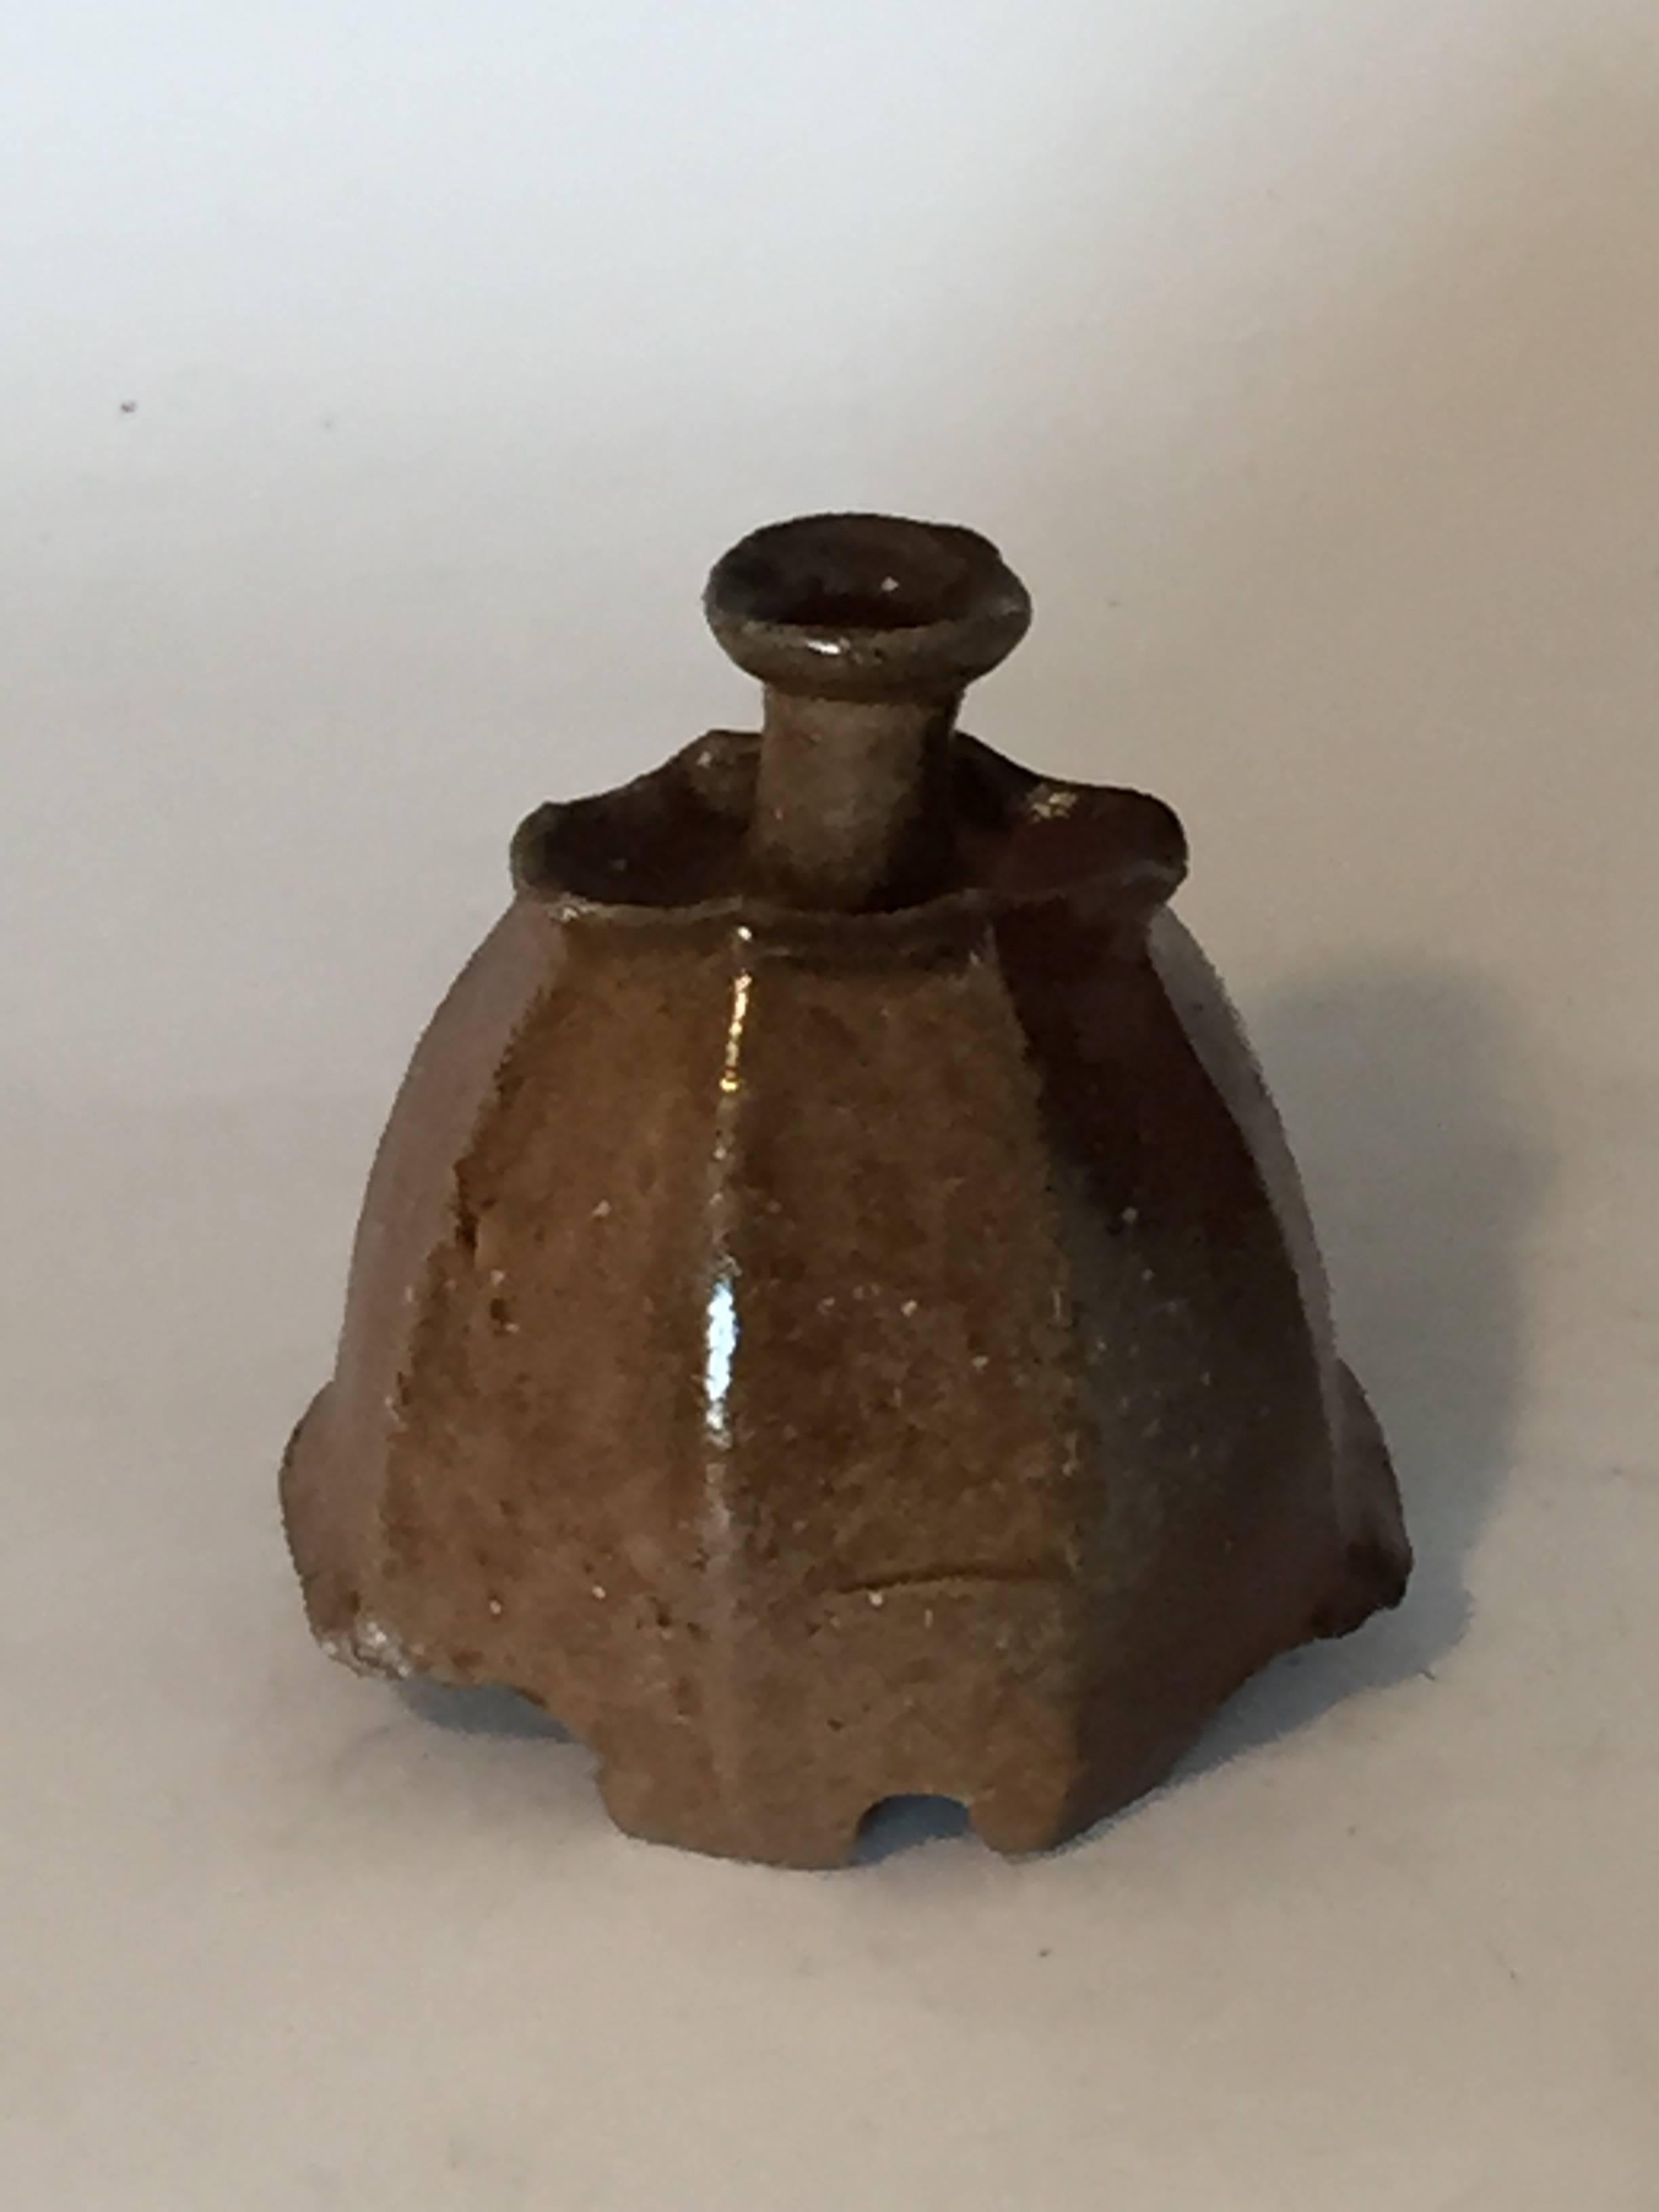 Offered by J R Richards
A bold and robust contemporary sake flask by esteemed Japanese ceramic master Kakurezaki Ryuichi.
This wood fired Bizen Tokkuri has beautiful surface colors; including scarlet red streaks, and brown colored patches.